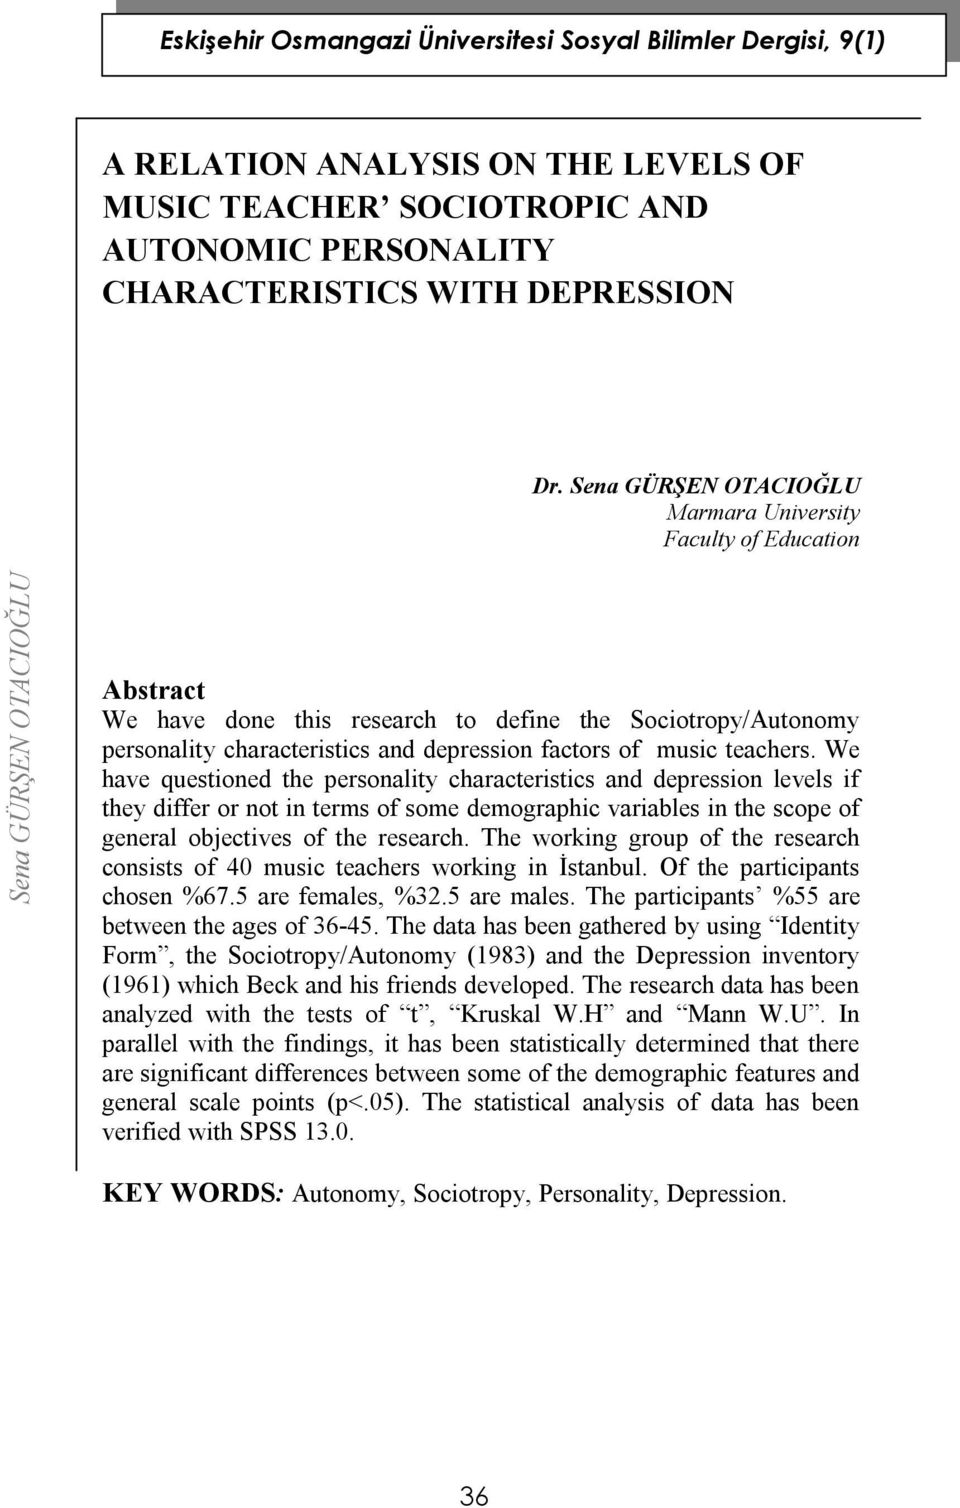 We have questioned the personality characteristics and depression levels if they differ or not in terms of some demographic variables in the scope of general objectives of the research.